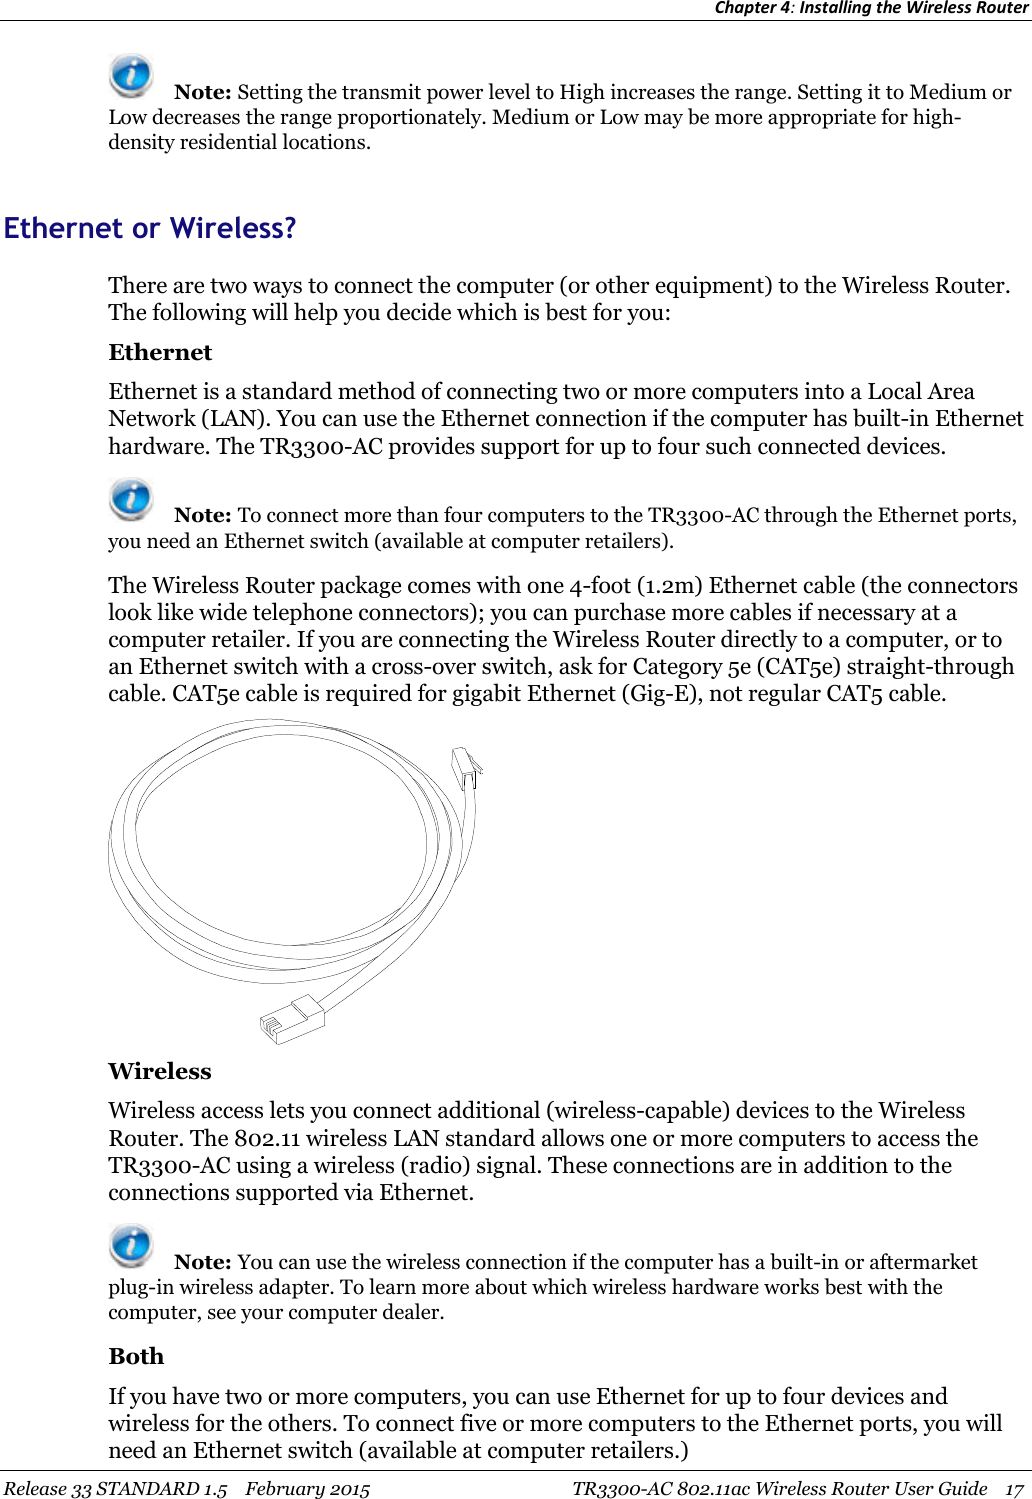 Chapter 4:Installing the Wireless RouterRelease 33 STANDARD 1.5 February 2015 TR3300-AC 802.11ac Wireless Router User Guide 17Note: Setting the transmit power level to High increases the range. Setting it to Medium orLow decreases the range proportionately. Medium or Low may be more appropriate for high-density residential locations.Ethernet or Wireless?There are two ways to connect the computer (or other equipment) to the Wireless Router.The following will help you decide which is best for you:EthernetEthernet is a standard method of connecting two or more computers into a Local AreaNetwork (LAN). You can use the Ethernet connection if the computer has built-in Ethernethardware. The TR3300-AC provides support for up to four such connected devices.Note: To connect more than four computers to the TR3300-AC through the Ethernet ports,you need an Ethernet switch (available at computer retailers).The Wireless Router package comes with one 4-foot (1.2m) Ethernet cable (the connectorslook like wide telephone connectors); you can purchase more cables if necessary at acomputer retailer. If you are connecting the Wireless Router directly to a computer, or toan Ethernet switch with a cross-over switch, ask for Category 5e (CAT5e) straight-throughcable. CAT5e cable is required for gigabit Ethernet (Gig-E), not regular CAT5 cable.WirelessWireless access lets you connect additional (wireless-capable) devices to the WirelessRouter. The 802.11 wireless LAN standard allows one or more computers to access theTR3300-AC using a wireless (radio) signal. These connections are in addition to theconnections supported via Ethernet.Note: You can use the wireless connection if the computer has a built-in or aftermarketplug-in wireless adapter. To learn more about which wireless hardware works best with thecomputer, see your computer dealer.BothIf you have two or more computers, you can use Ethernet for up to four devices andwireless for the others. To connect five or more computers to the Ethernet ports, you willneed an Ethernet switch (available at computer retailers.)